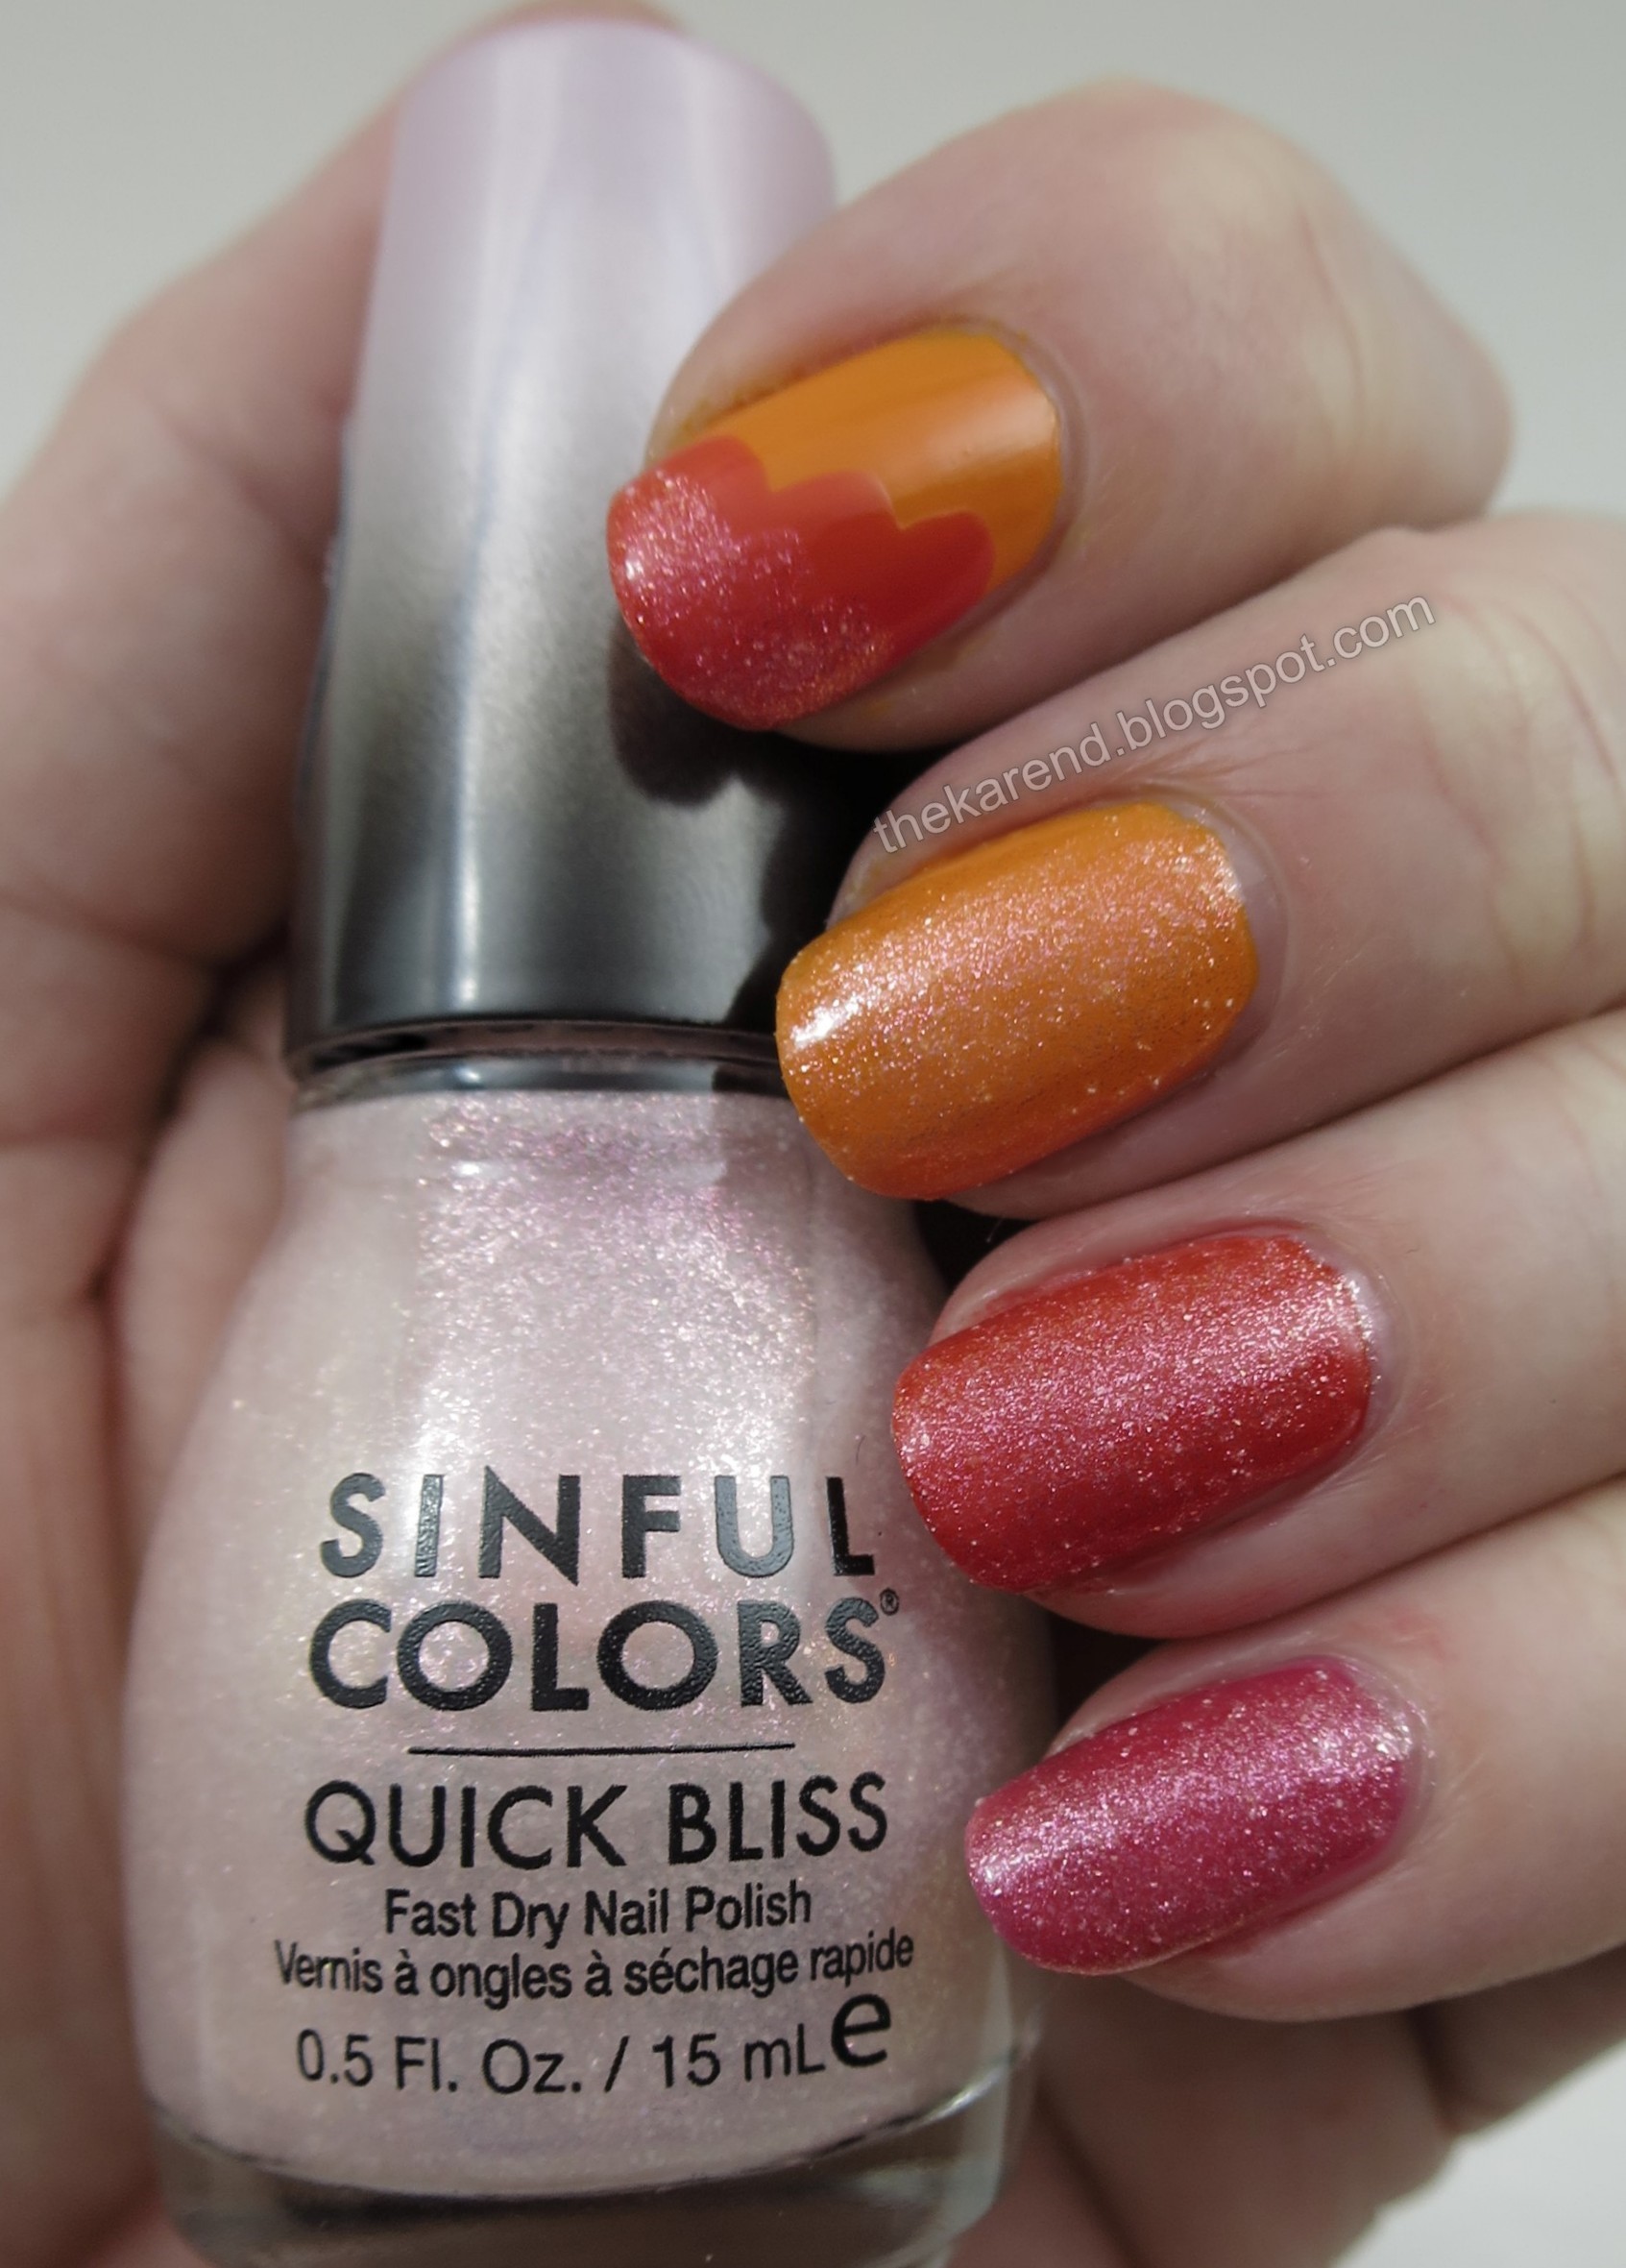 Sinfulcolors Quick Bliss Nail Polish, Fast Dry, Cherry Chaser 2672 - 0.5 fl. oz (15 ml)